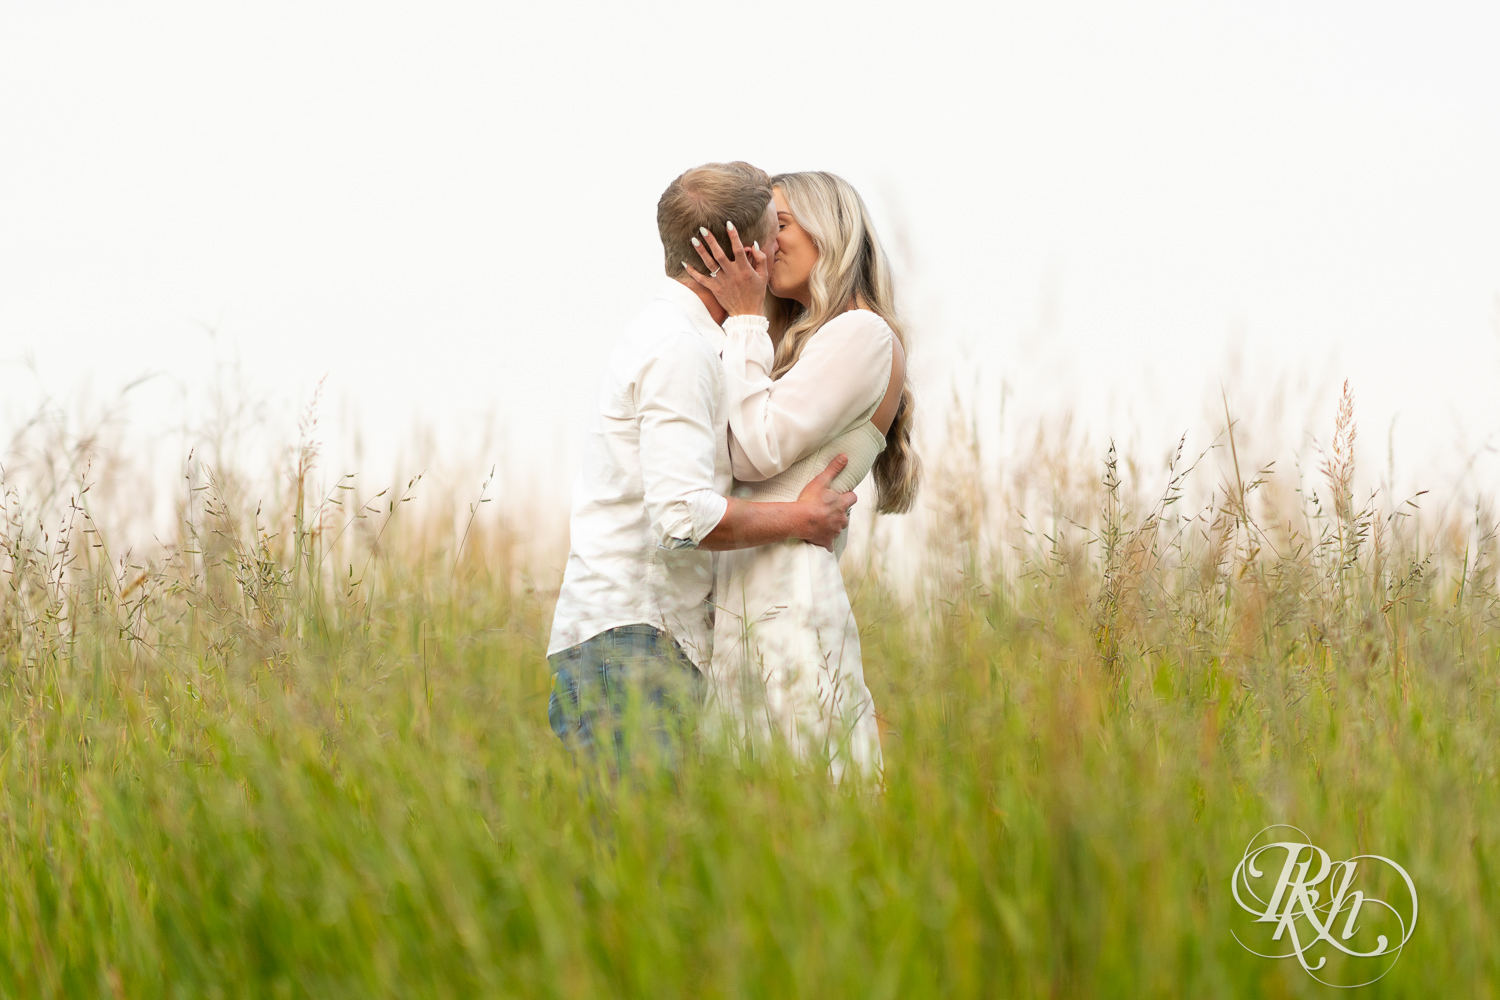 Man and woman in white and cowboy boots kiss in open field engagement photos at Lebanon Hills Regional Park in Eagan, Minnesota.